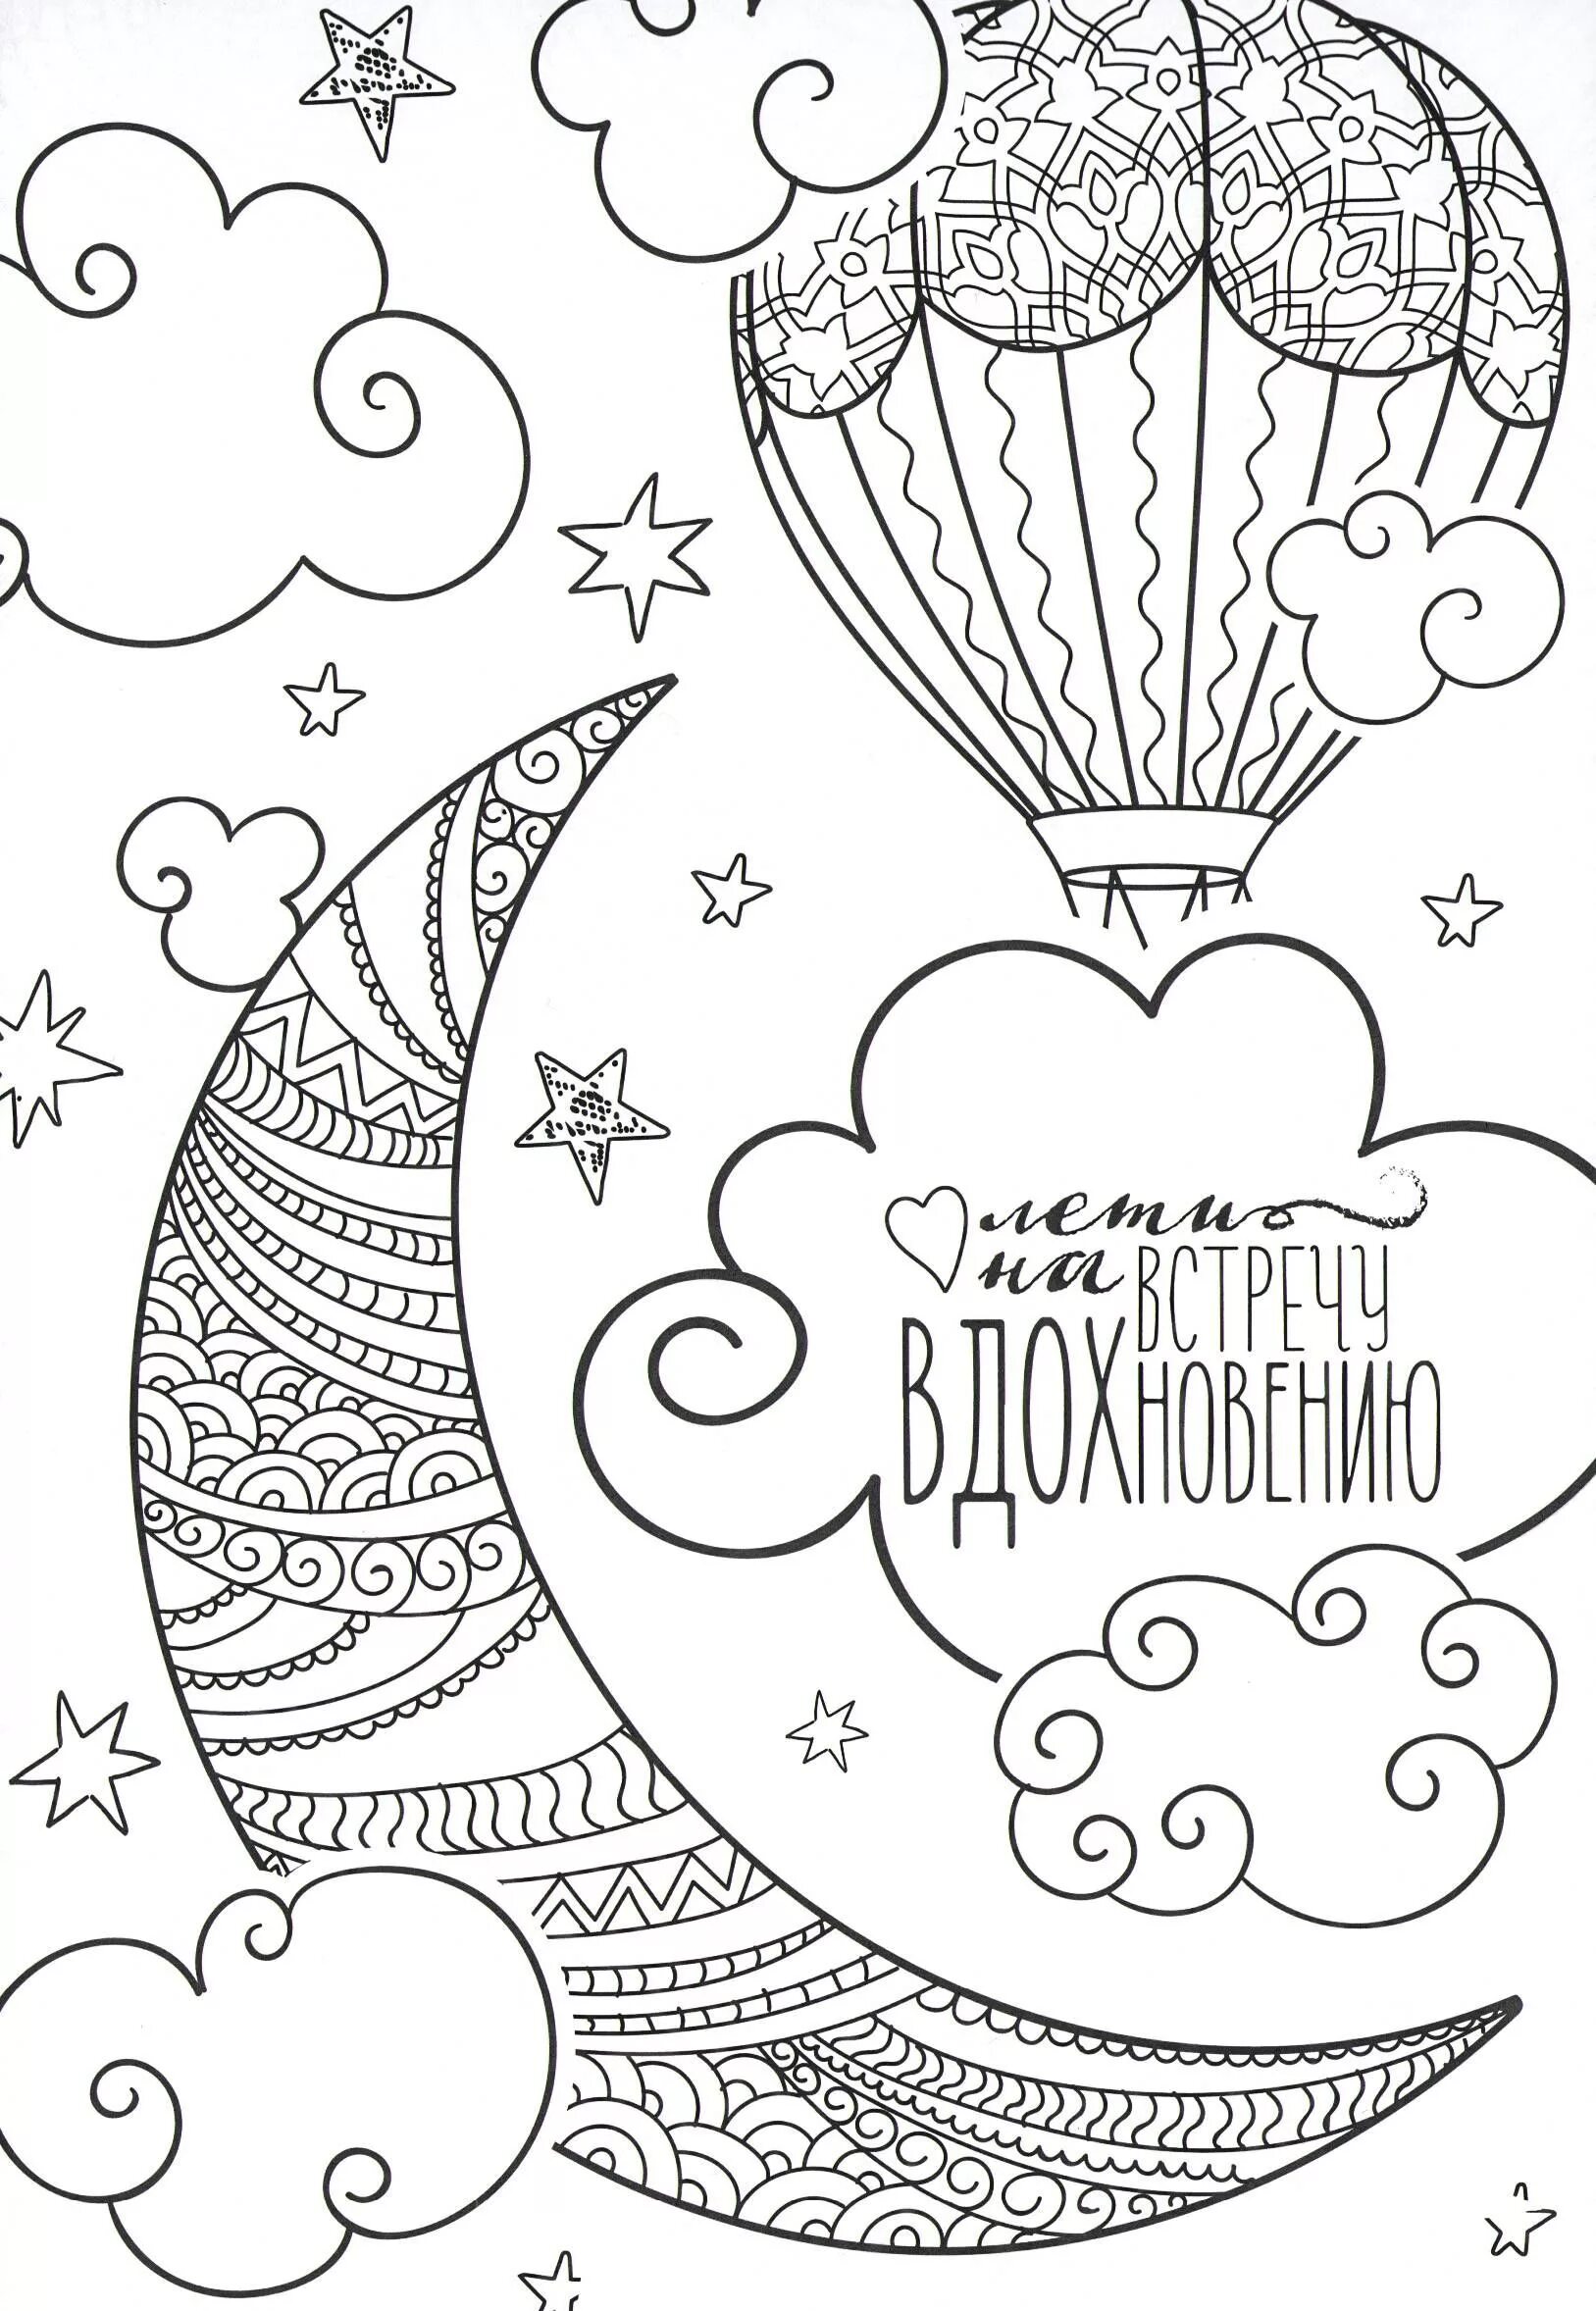 Fun coloring book you are a great stress reliever